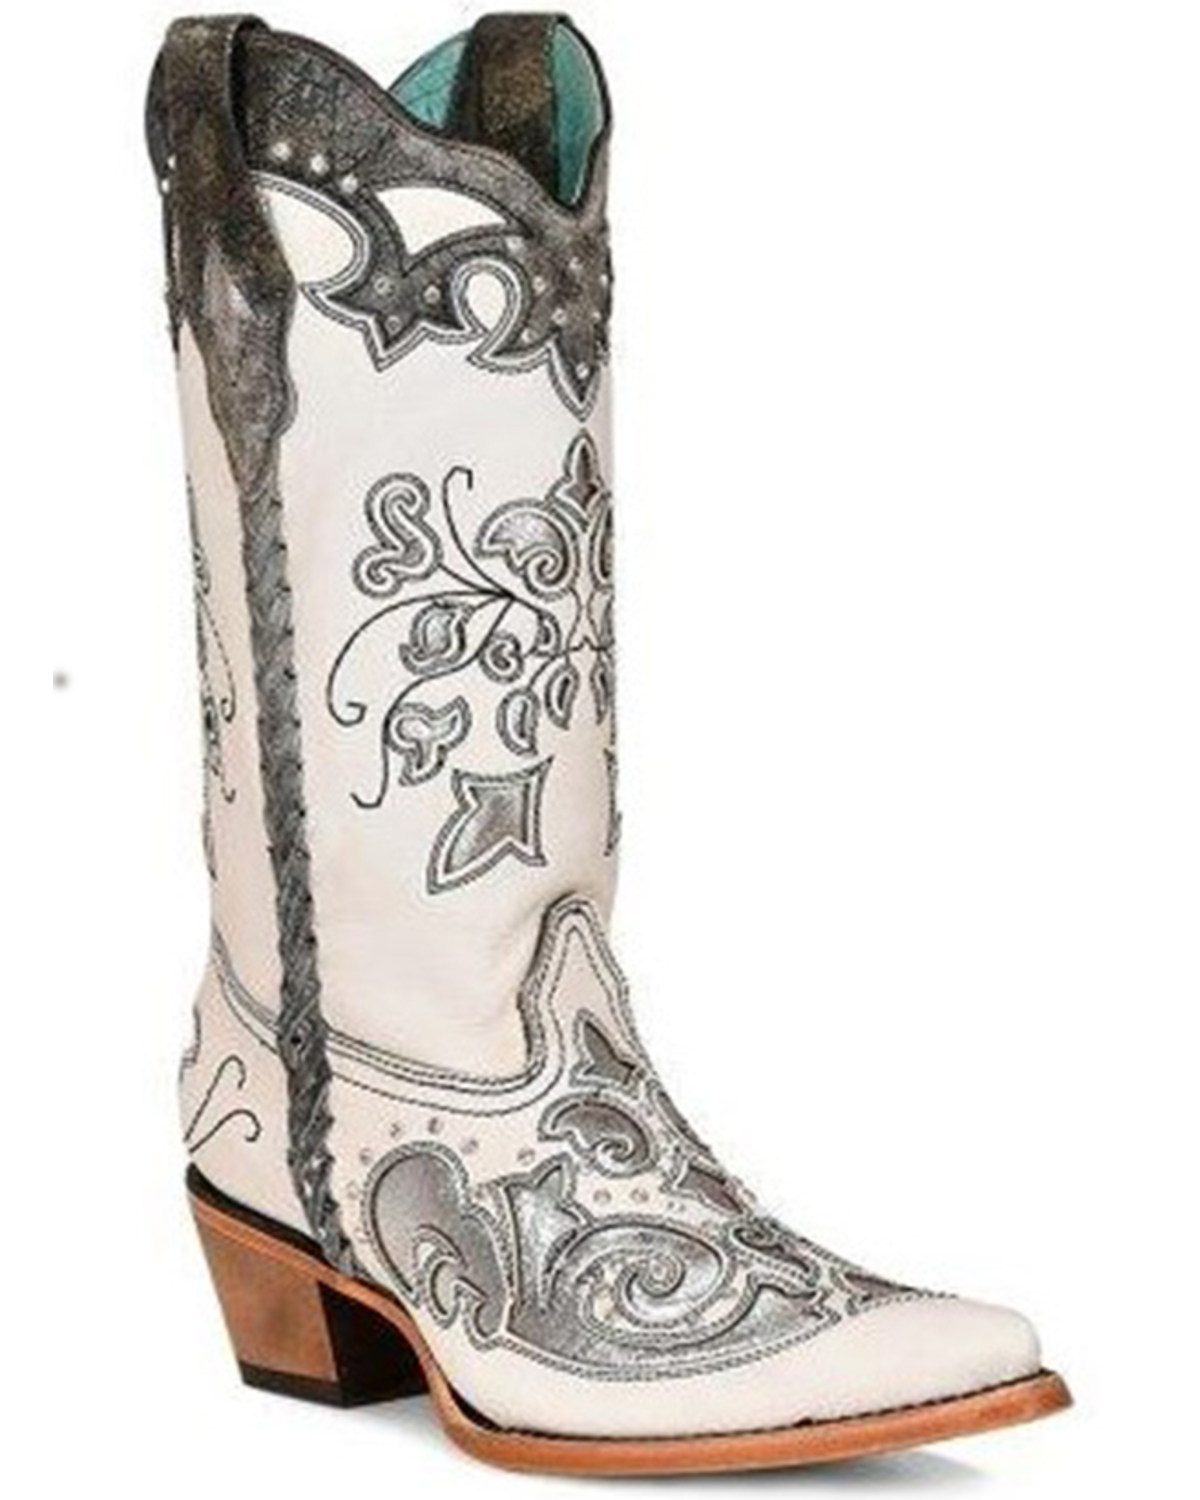 Corral Women's Floral Inlay Western Boots - Pointed Toe